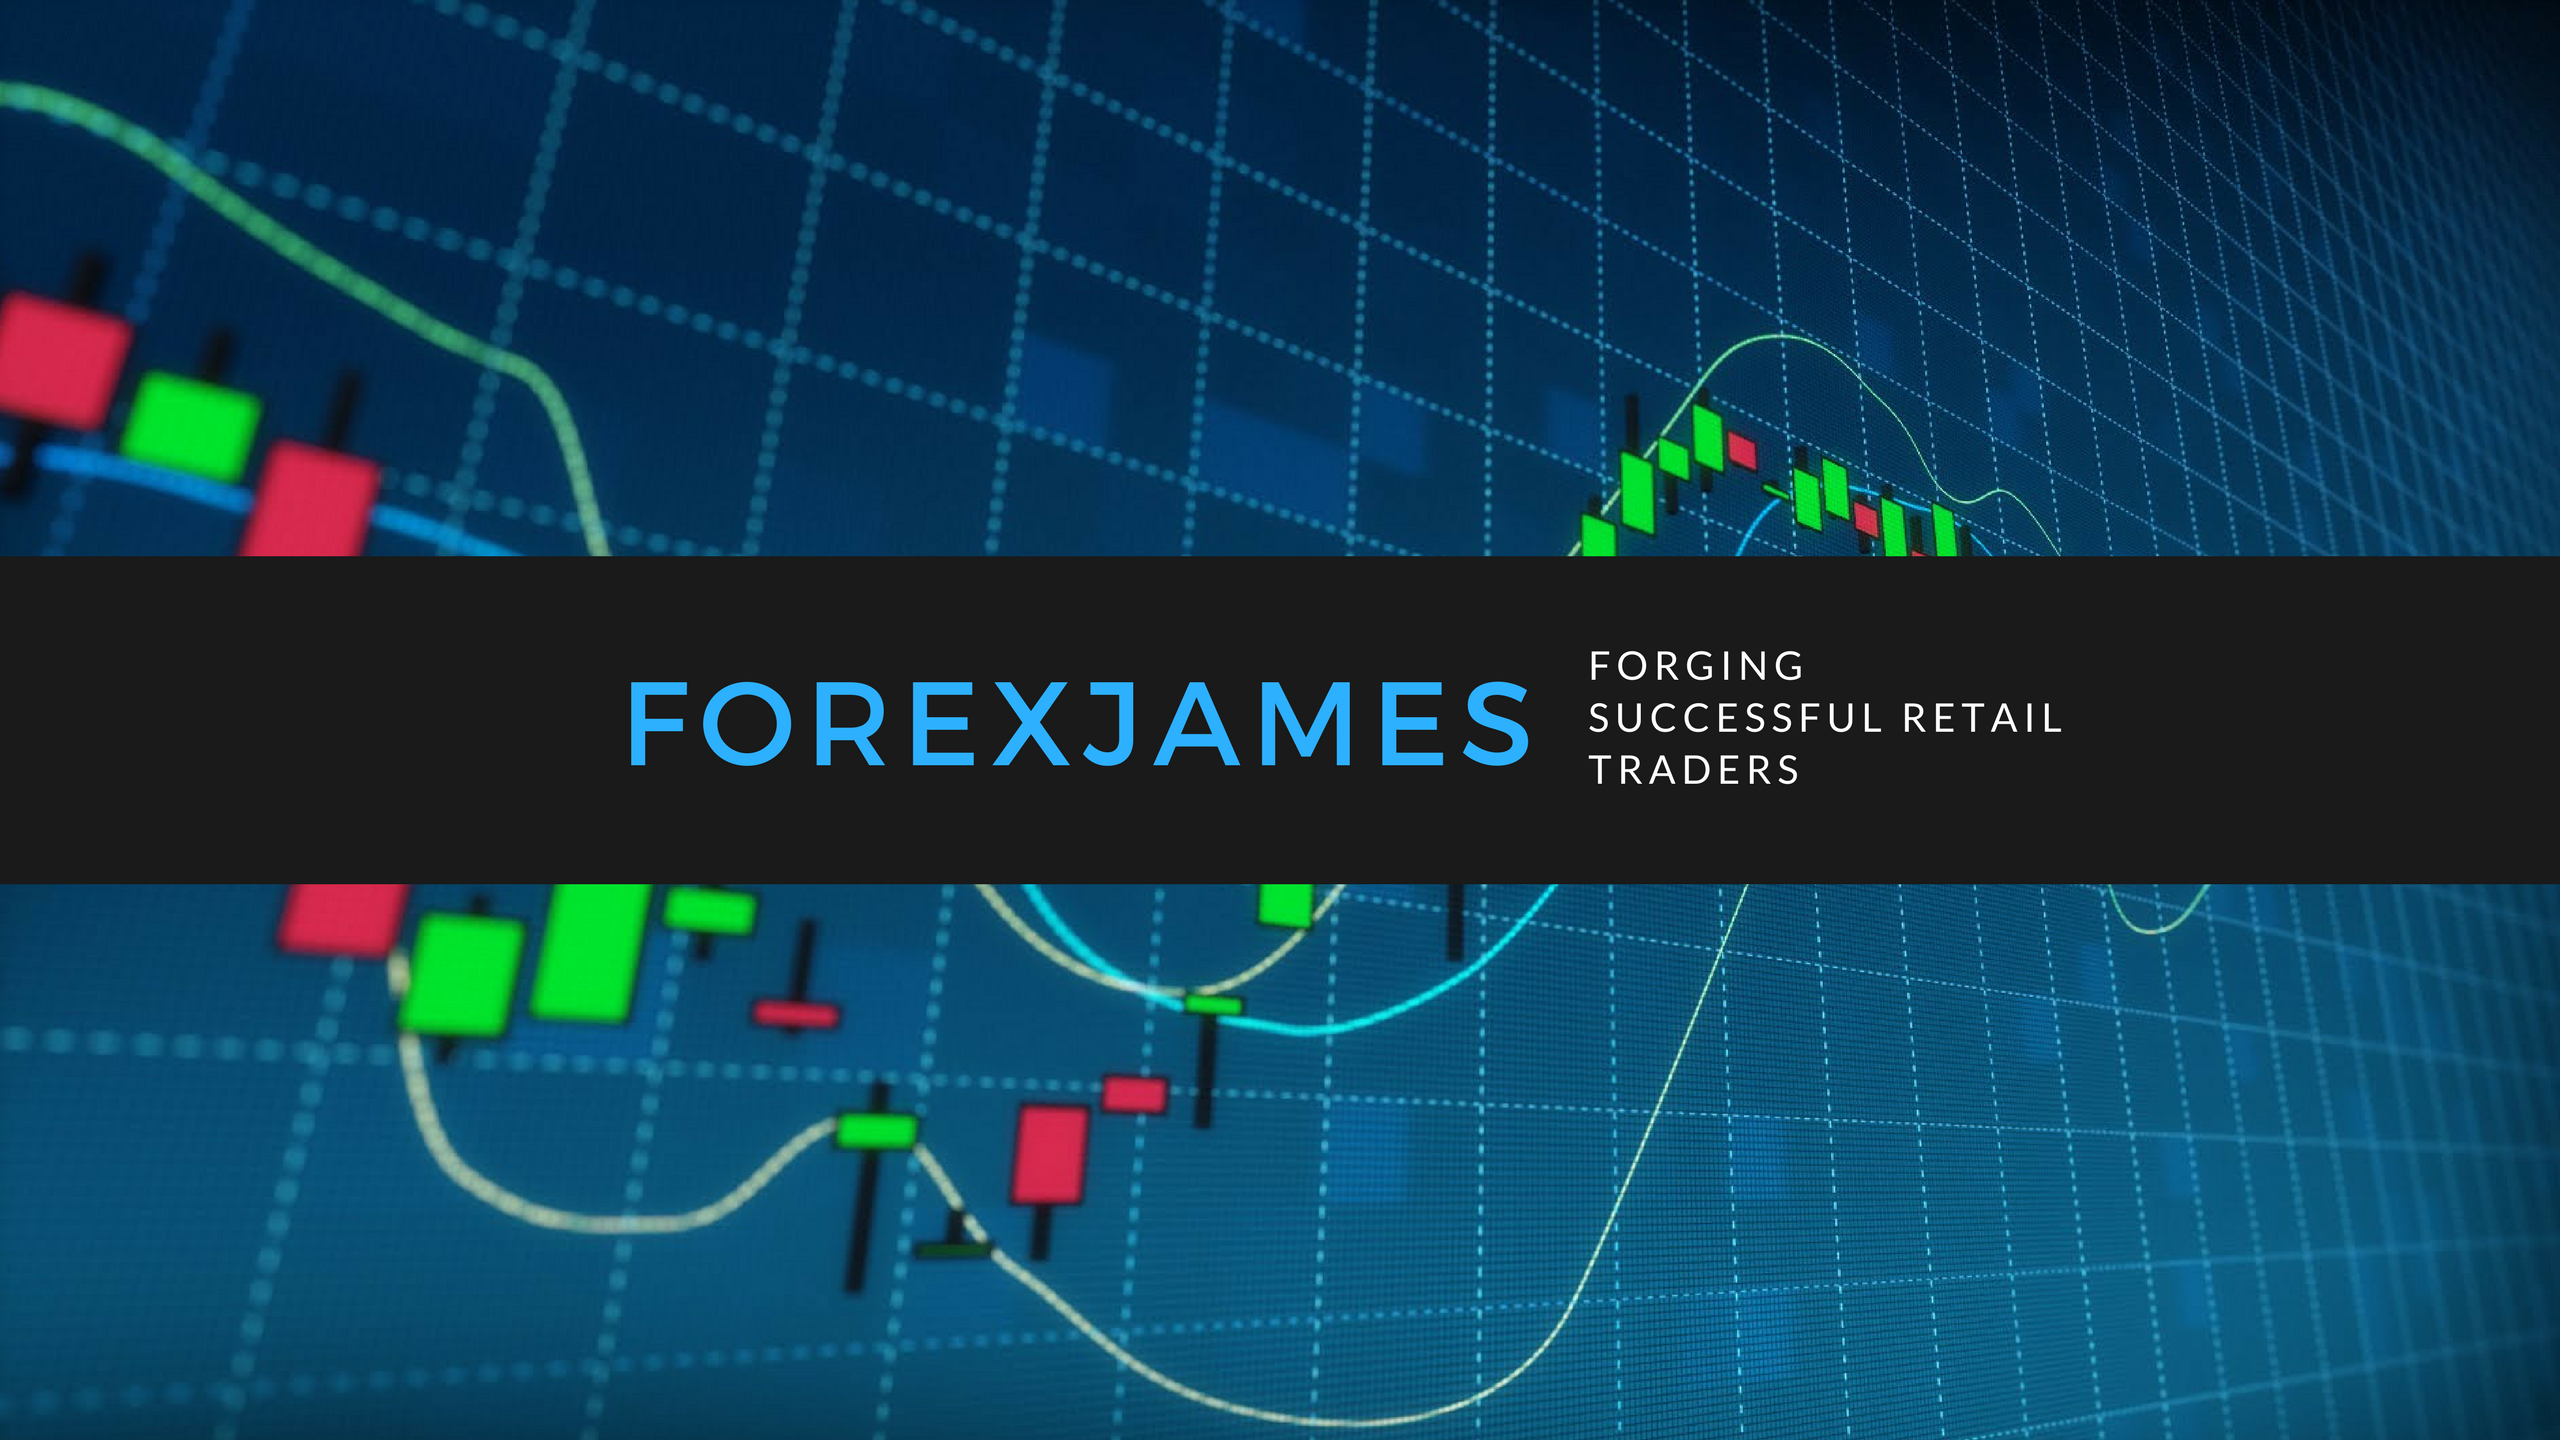 forex james forging successful retail traders